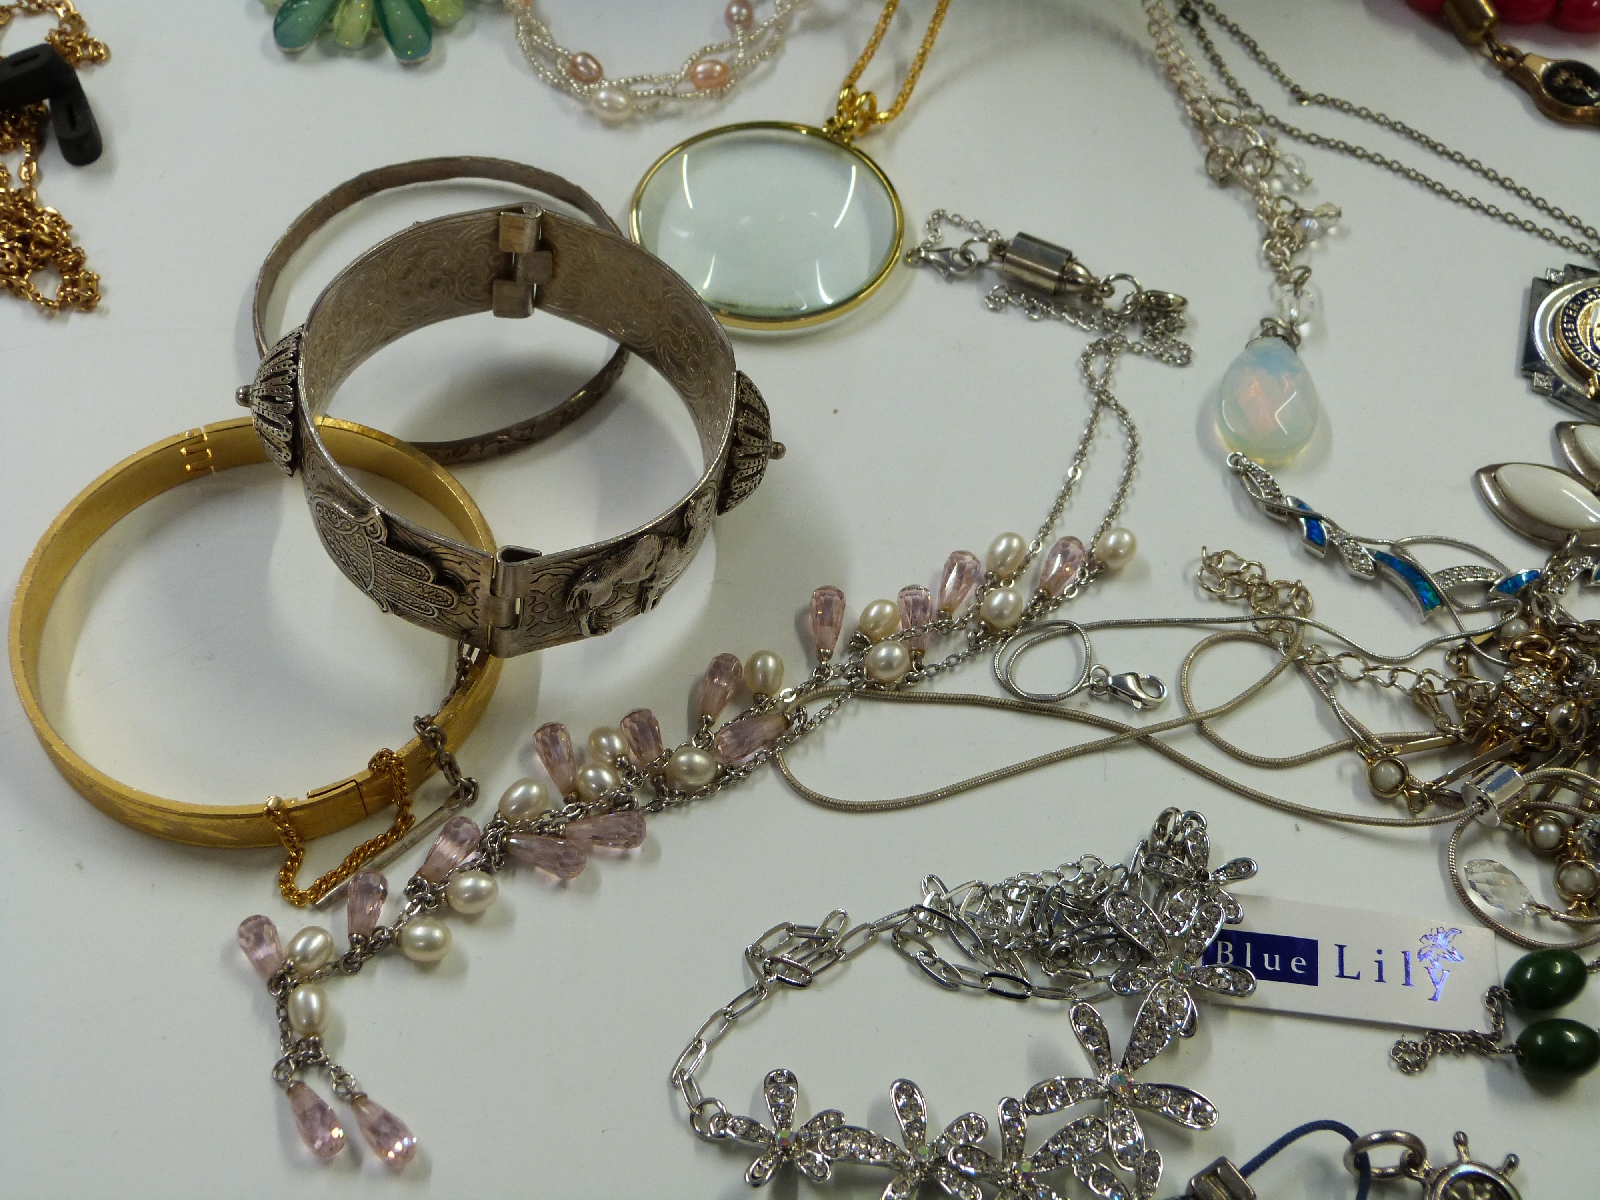 A large collection of costume jewellery including silver rings, beads, silver necklaces, brooches, - Image 4 of 9